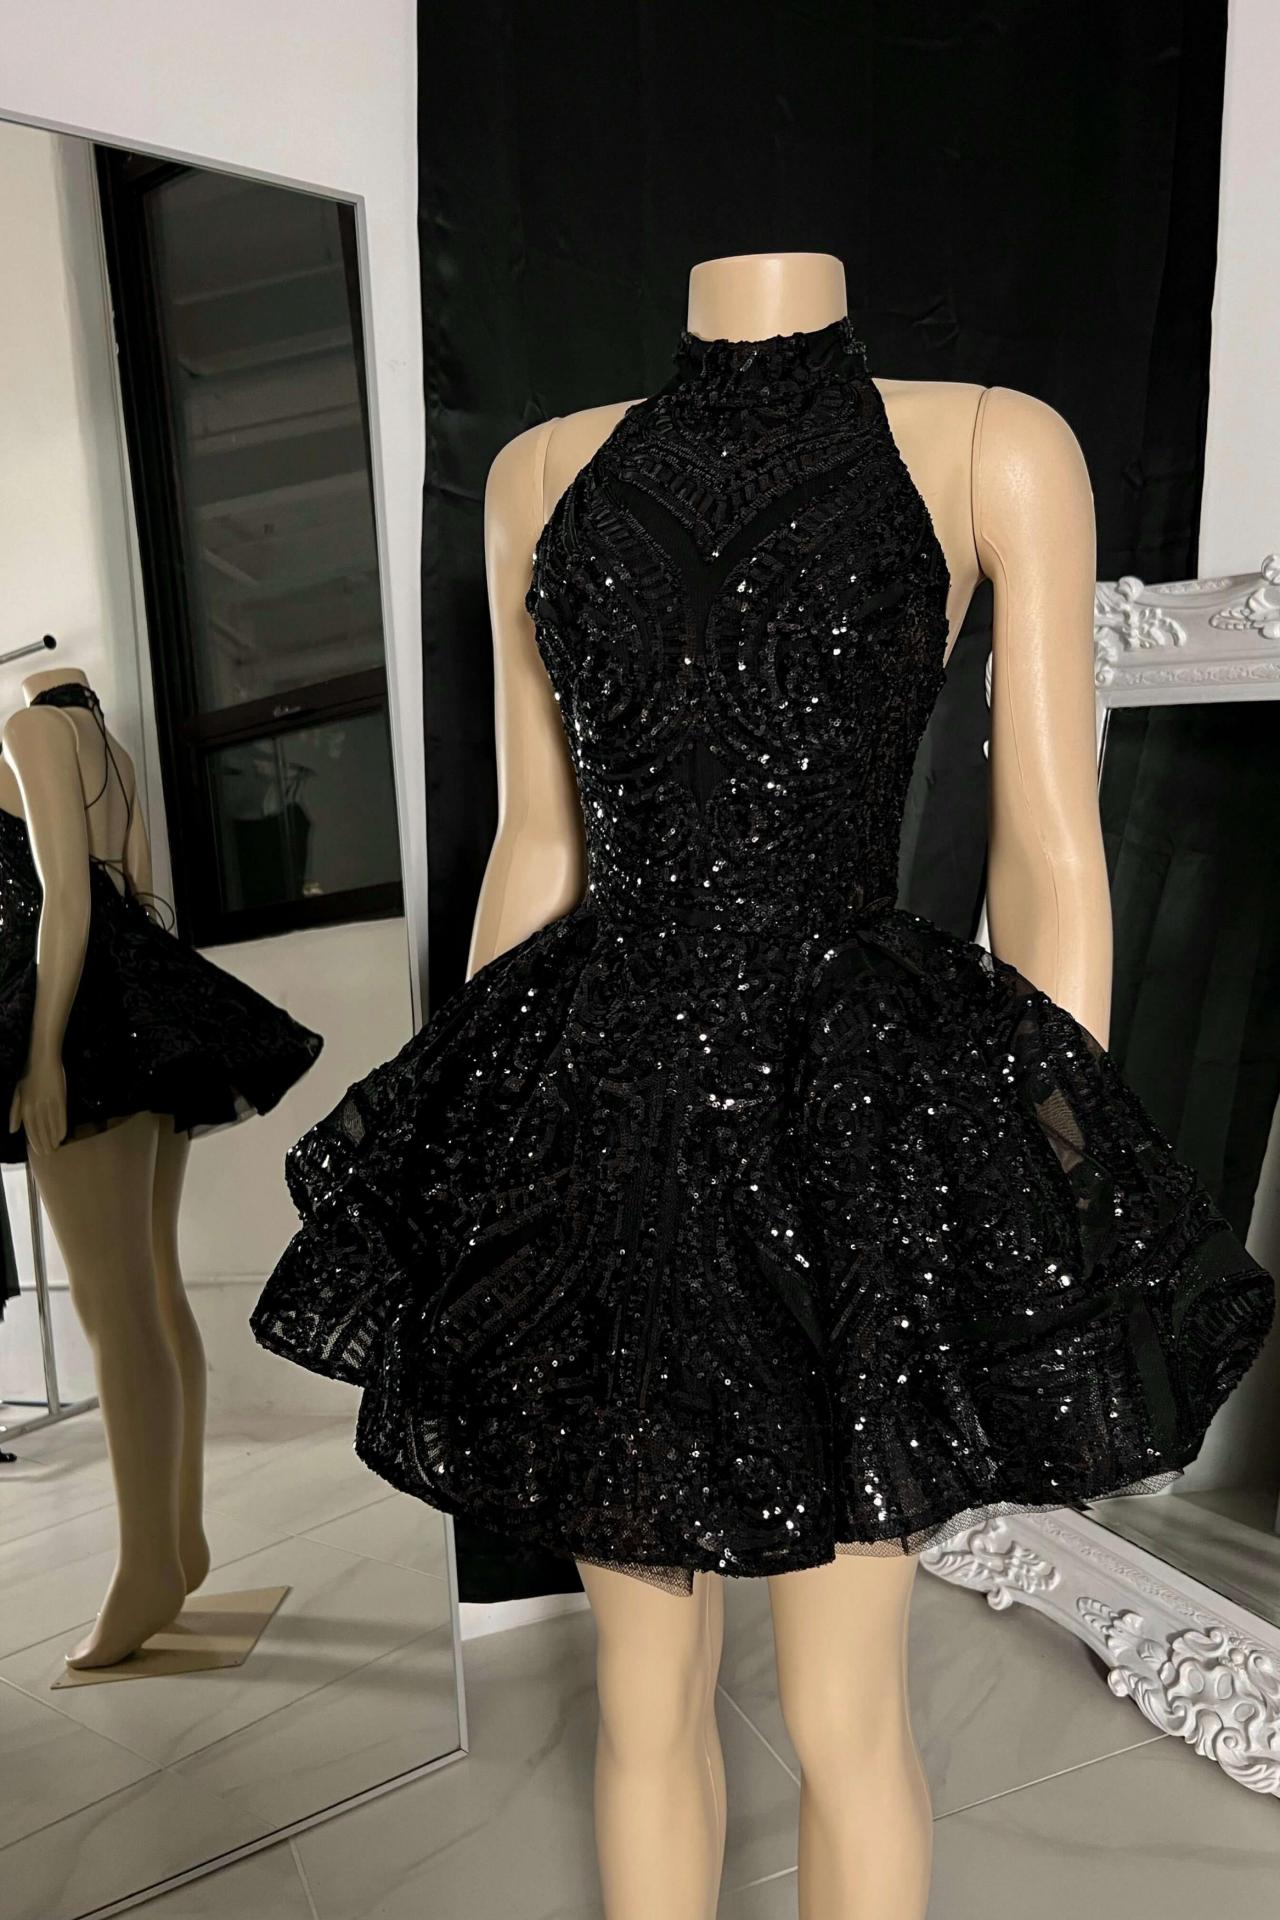 Best party dresses: 40 party dresses for women to buy in 2023